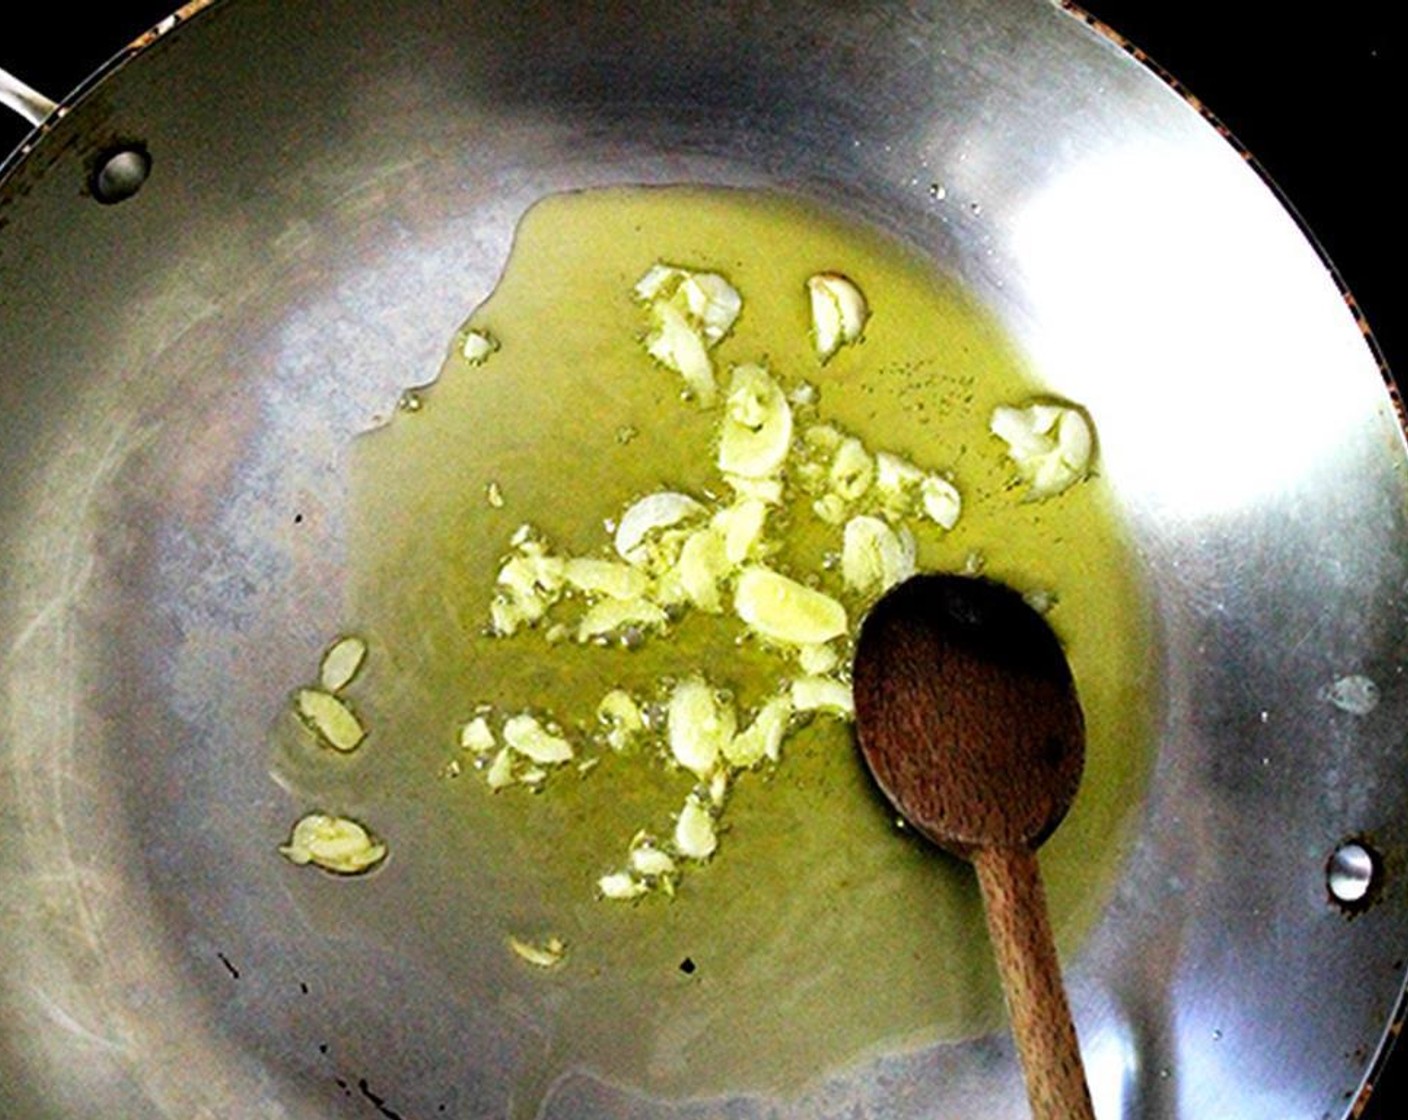 step 5 Place Extra-Virgin Olive Oil (3 Tbsp), Garlic (1 clove) in a large sauté pan over medium heat. When the garlic starts sizzling in the oil, add 4 cups of the cooked chickpeas and season with Salt (to taste) and Ground Black Pepper (to taste).